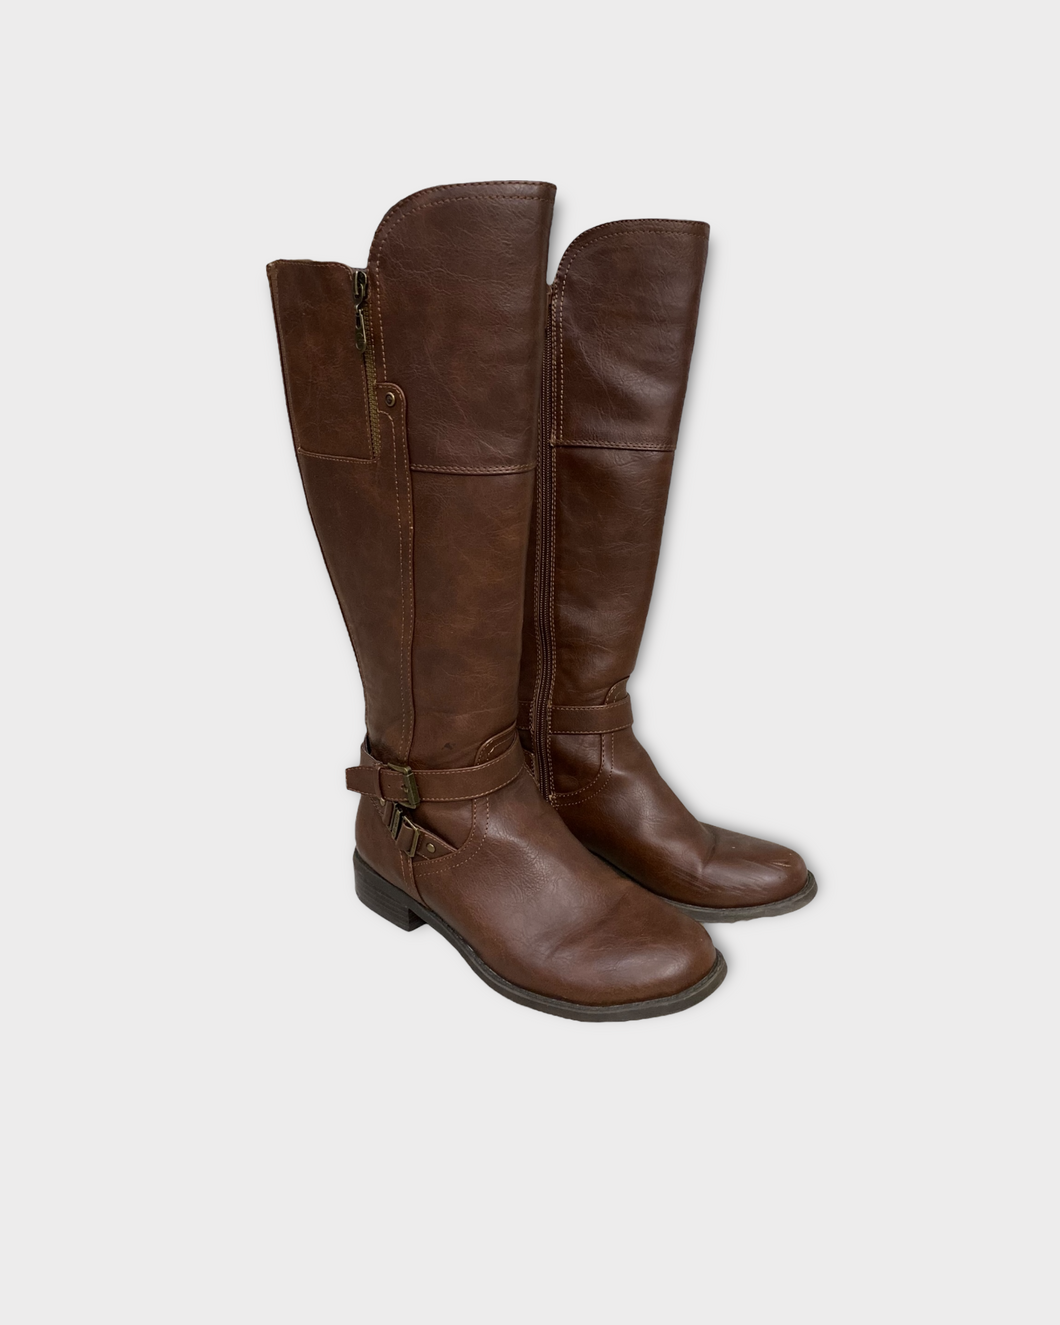 G by Guess Harson Brown Boots (9 1/2)